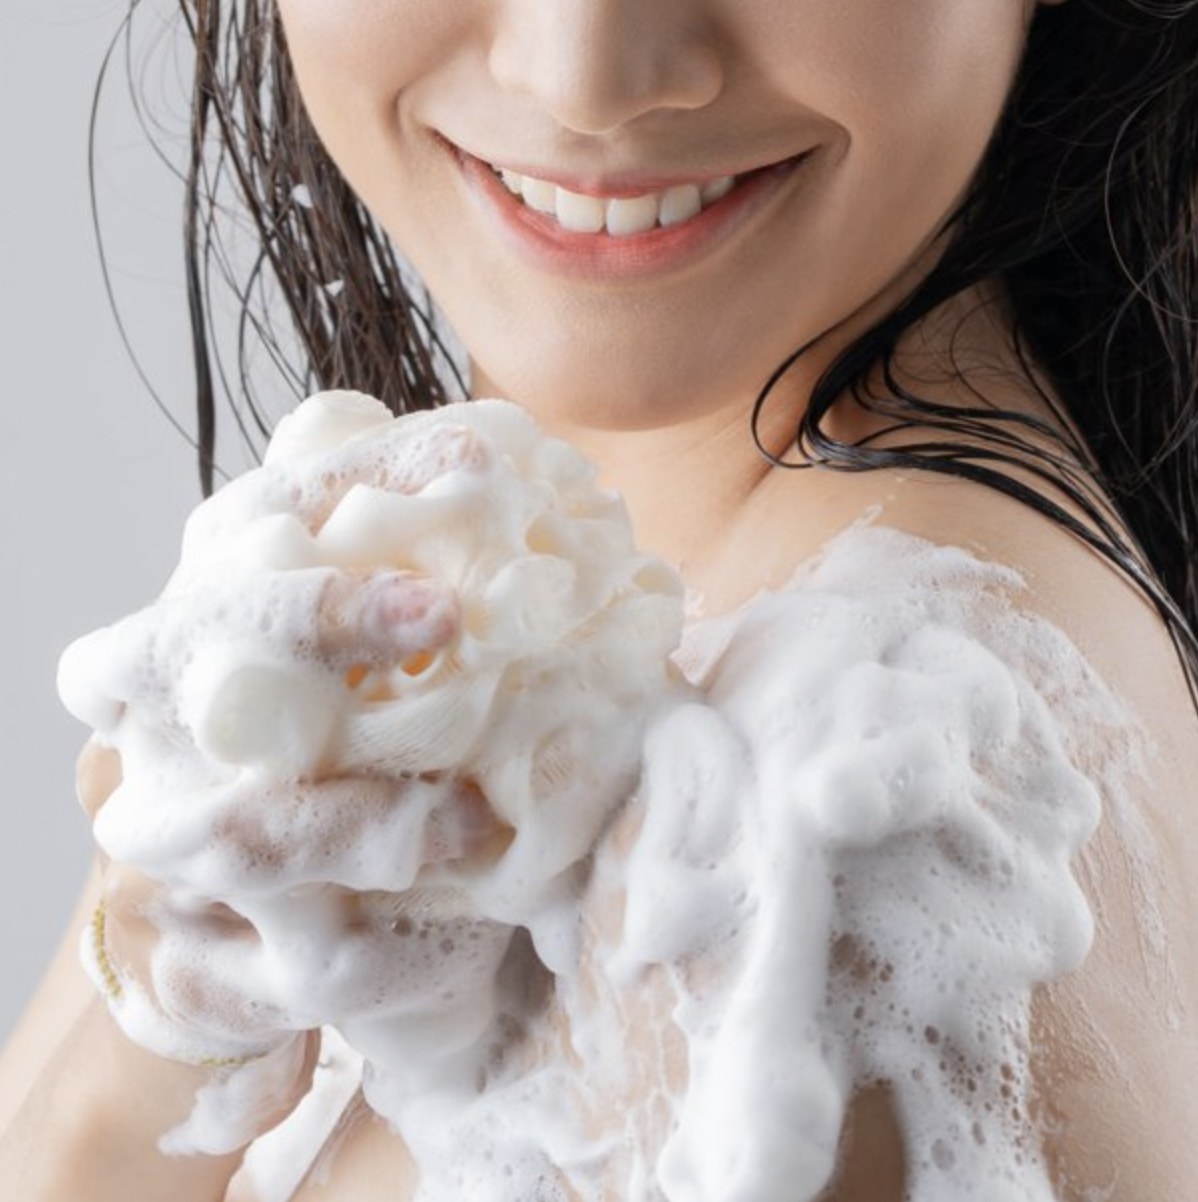 A person lathering their skin with body wash and a bath sponge